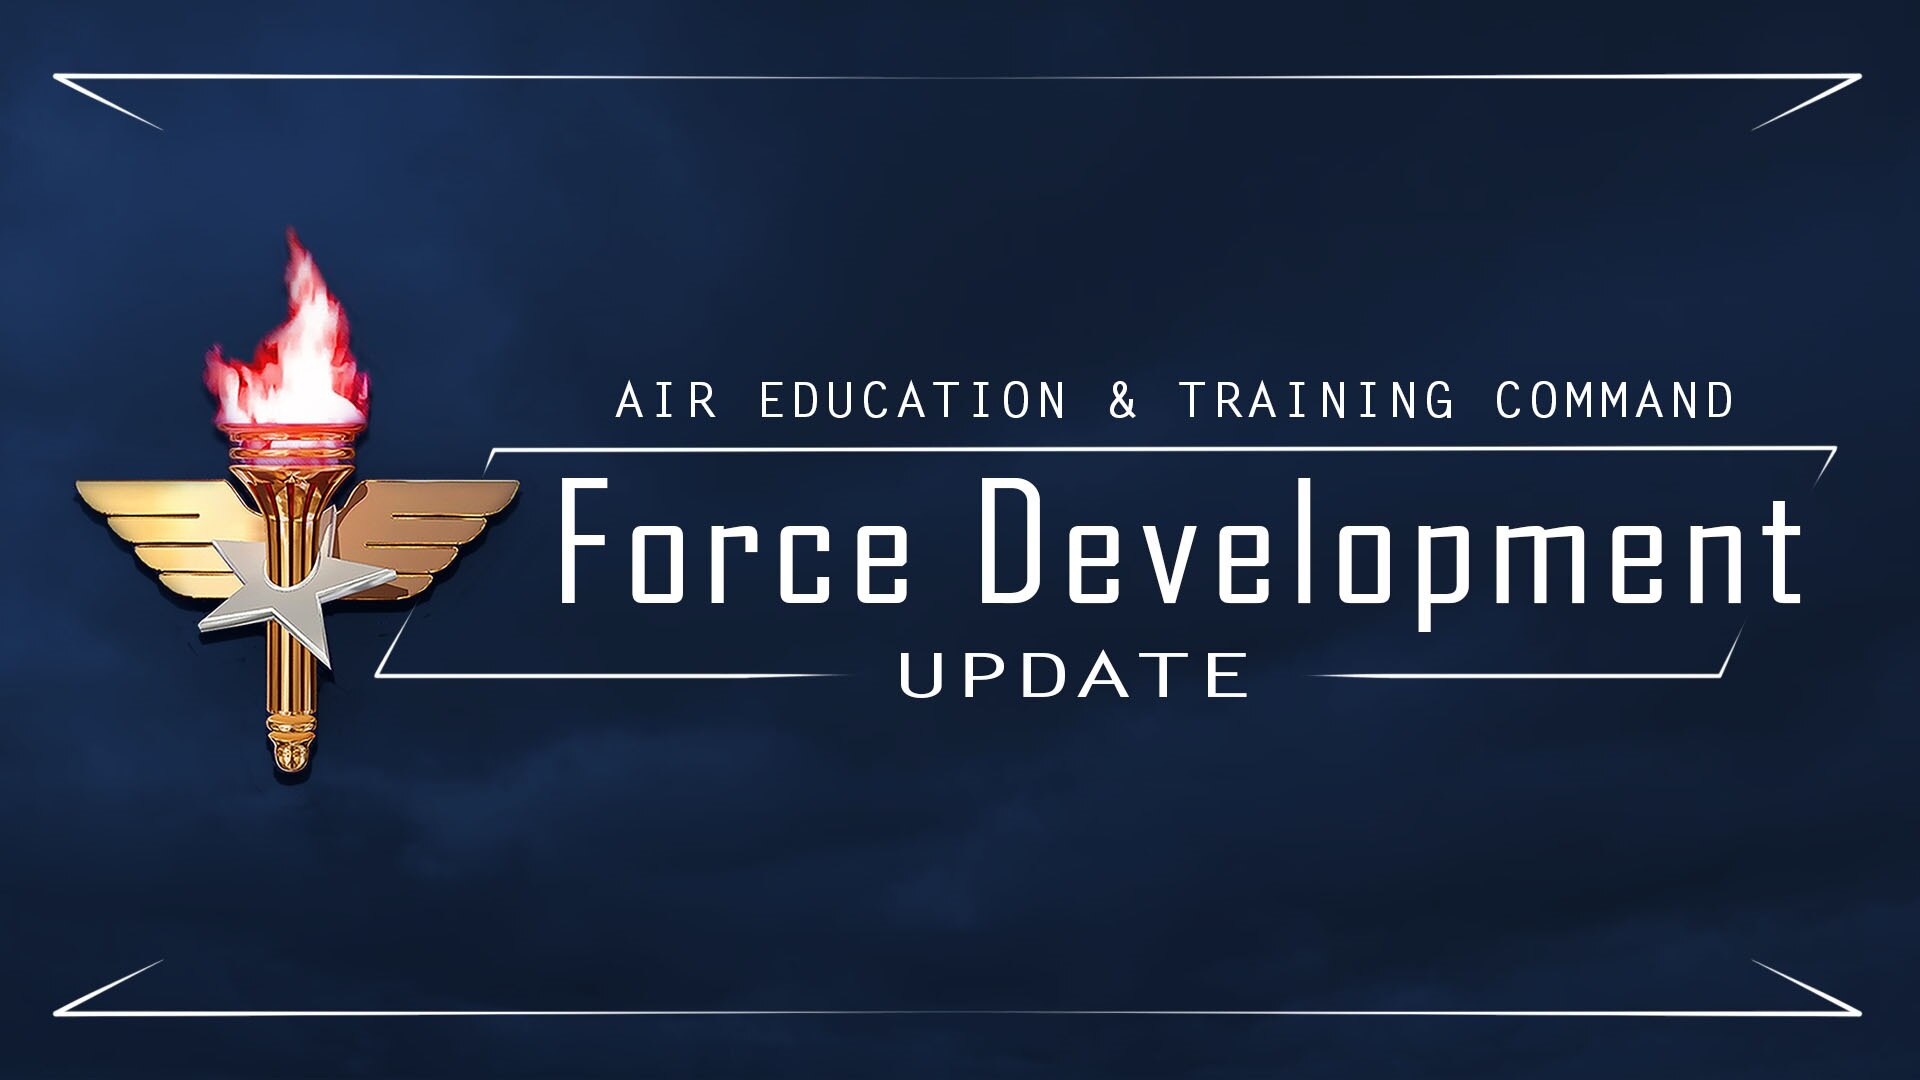 As part of the effort to better develop the Airmen required to support the Air Force we need, Air Education and Training Command will hold the first-ever Force Development Summit Dec. 16-17, 2019